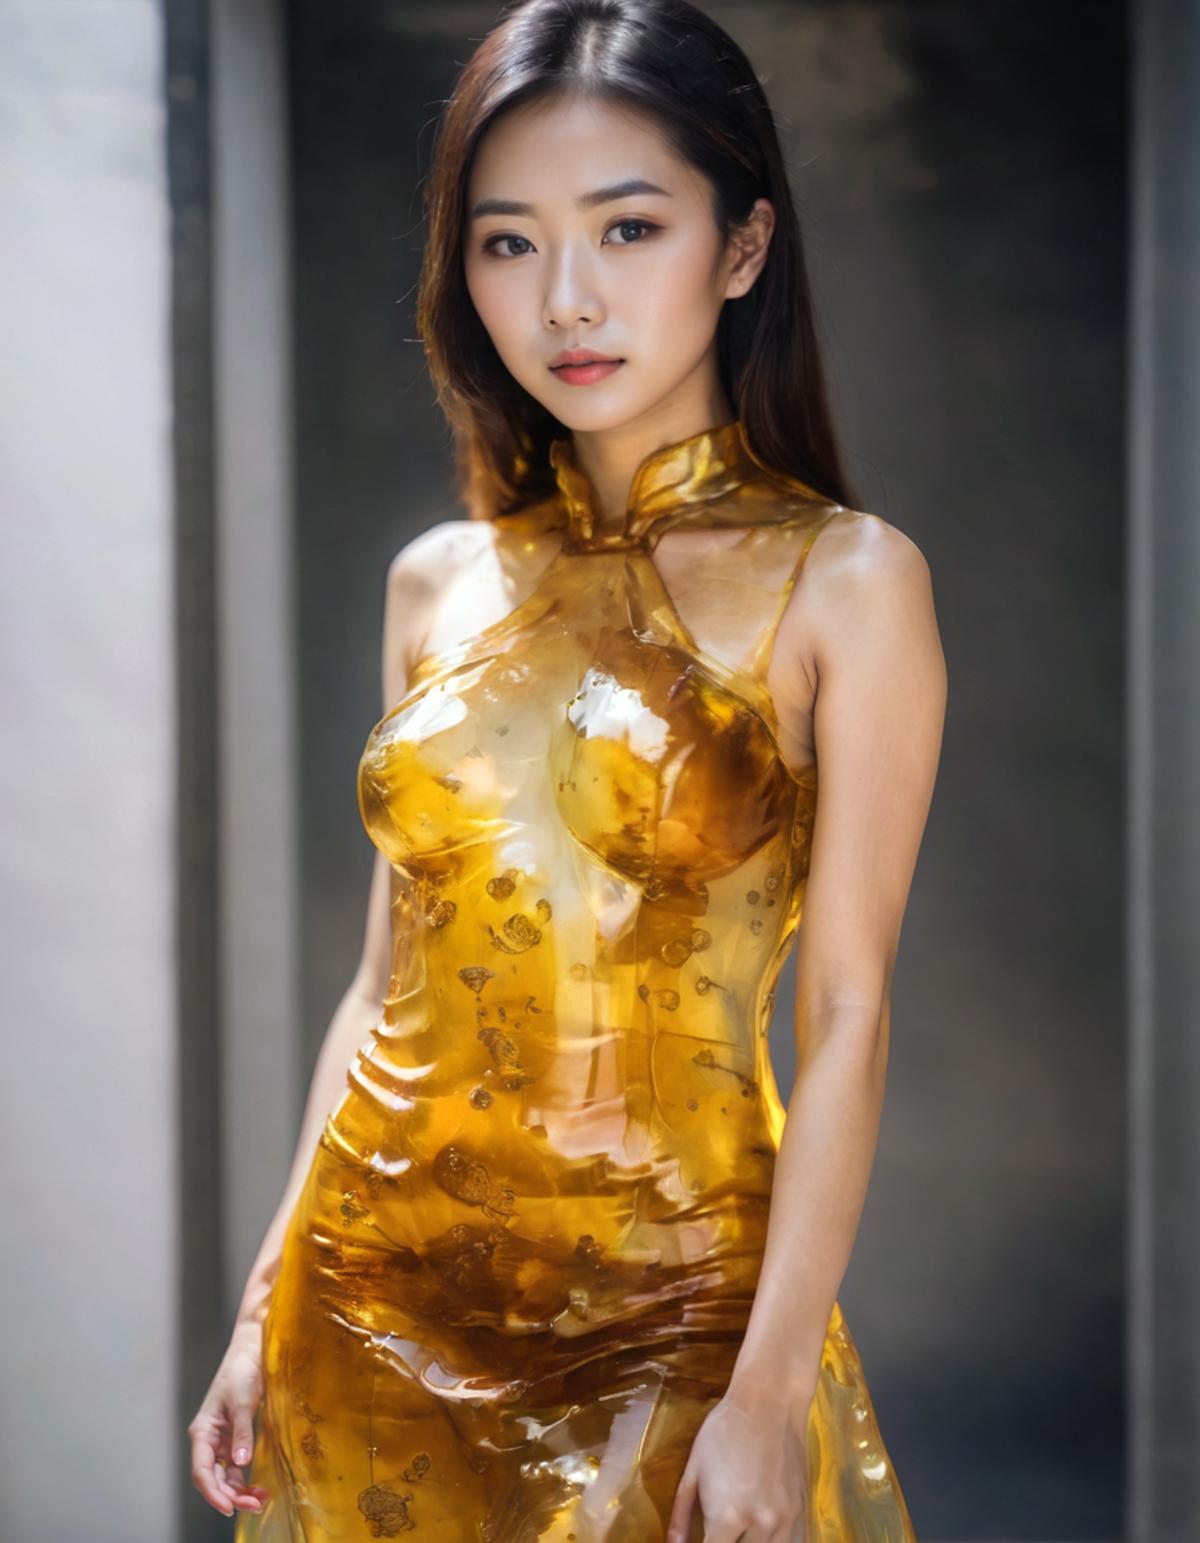 A woman wearing a yellow dress with an Asian design.